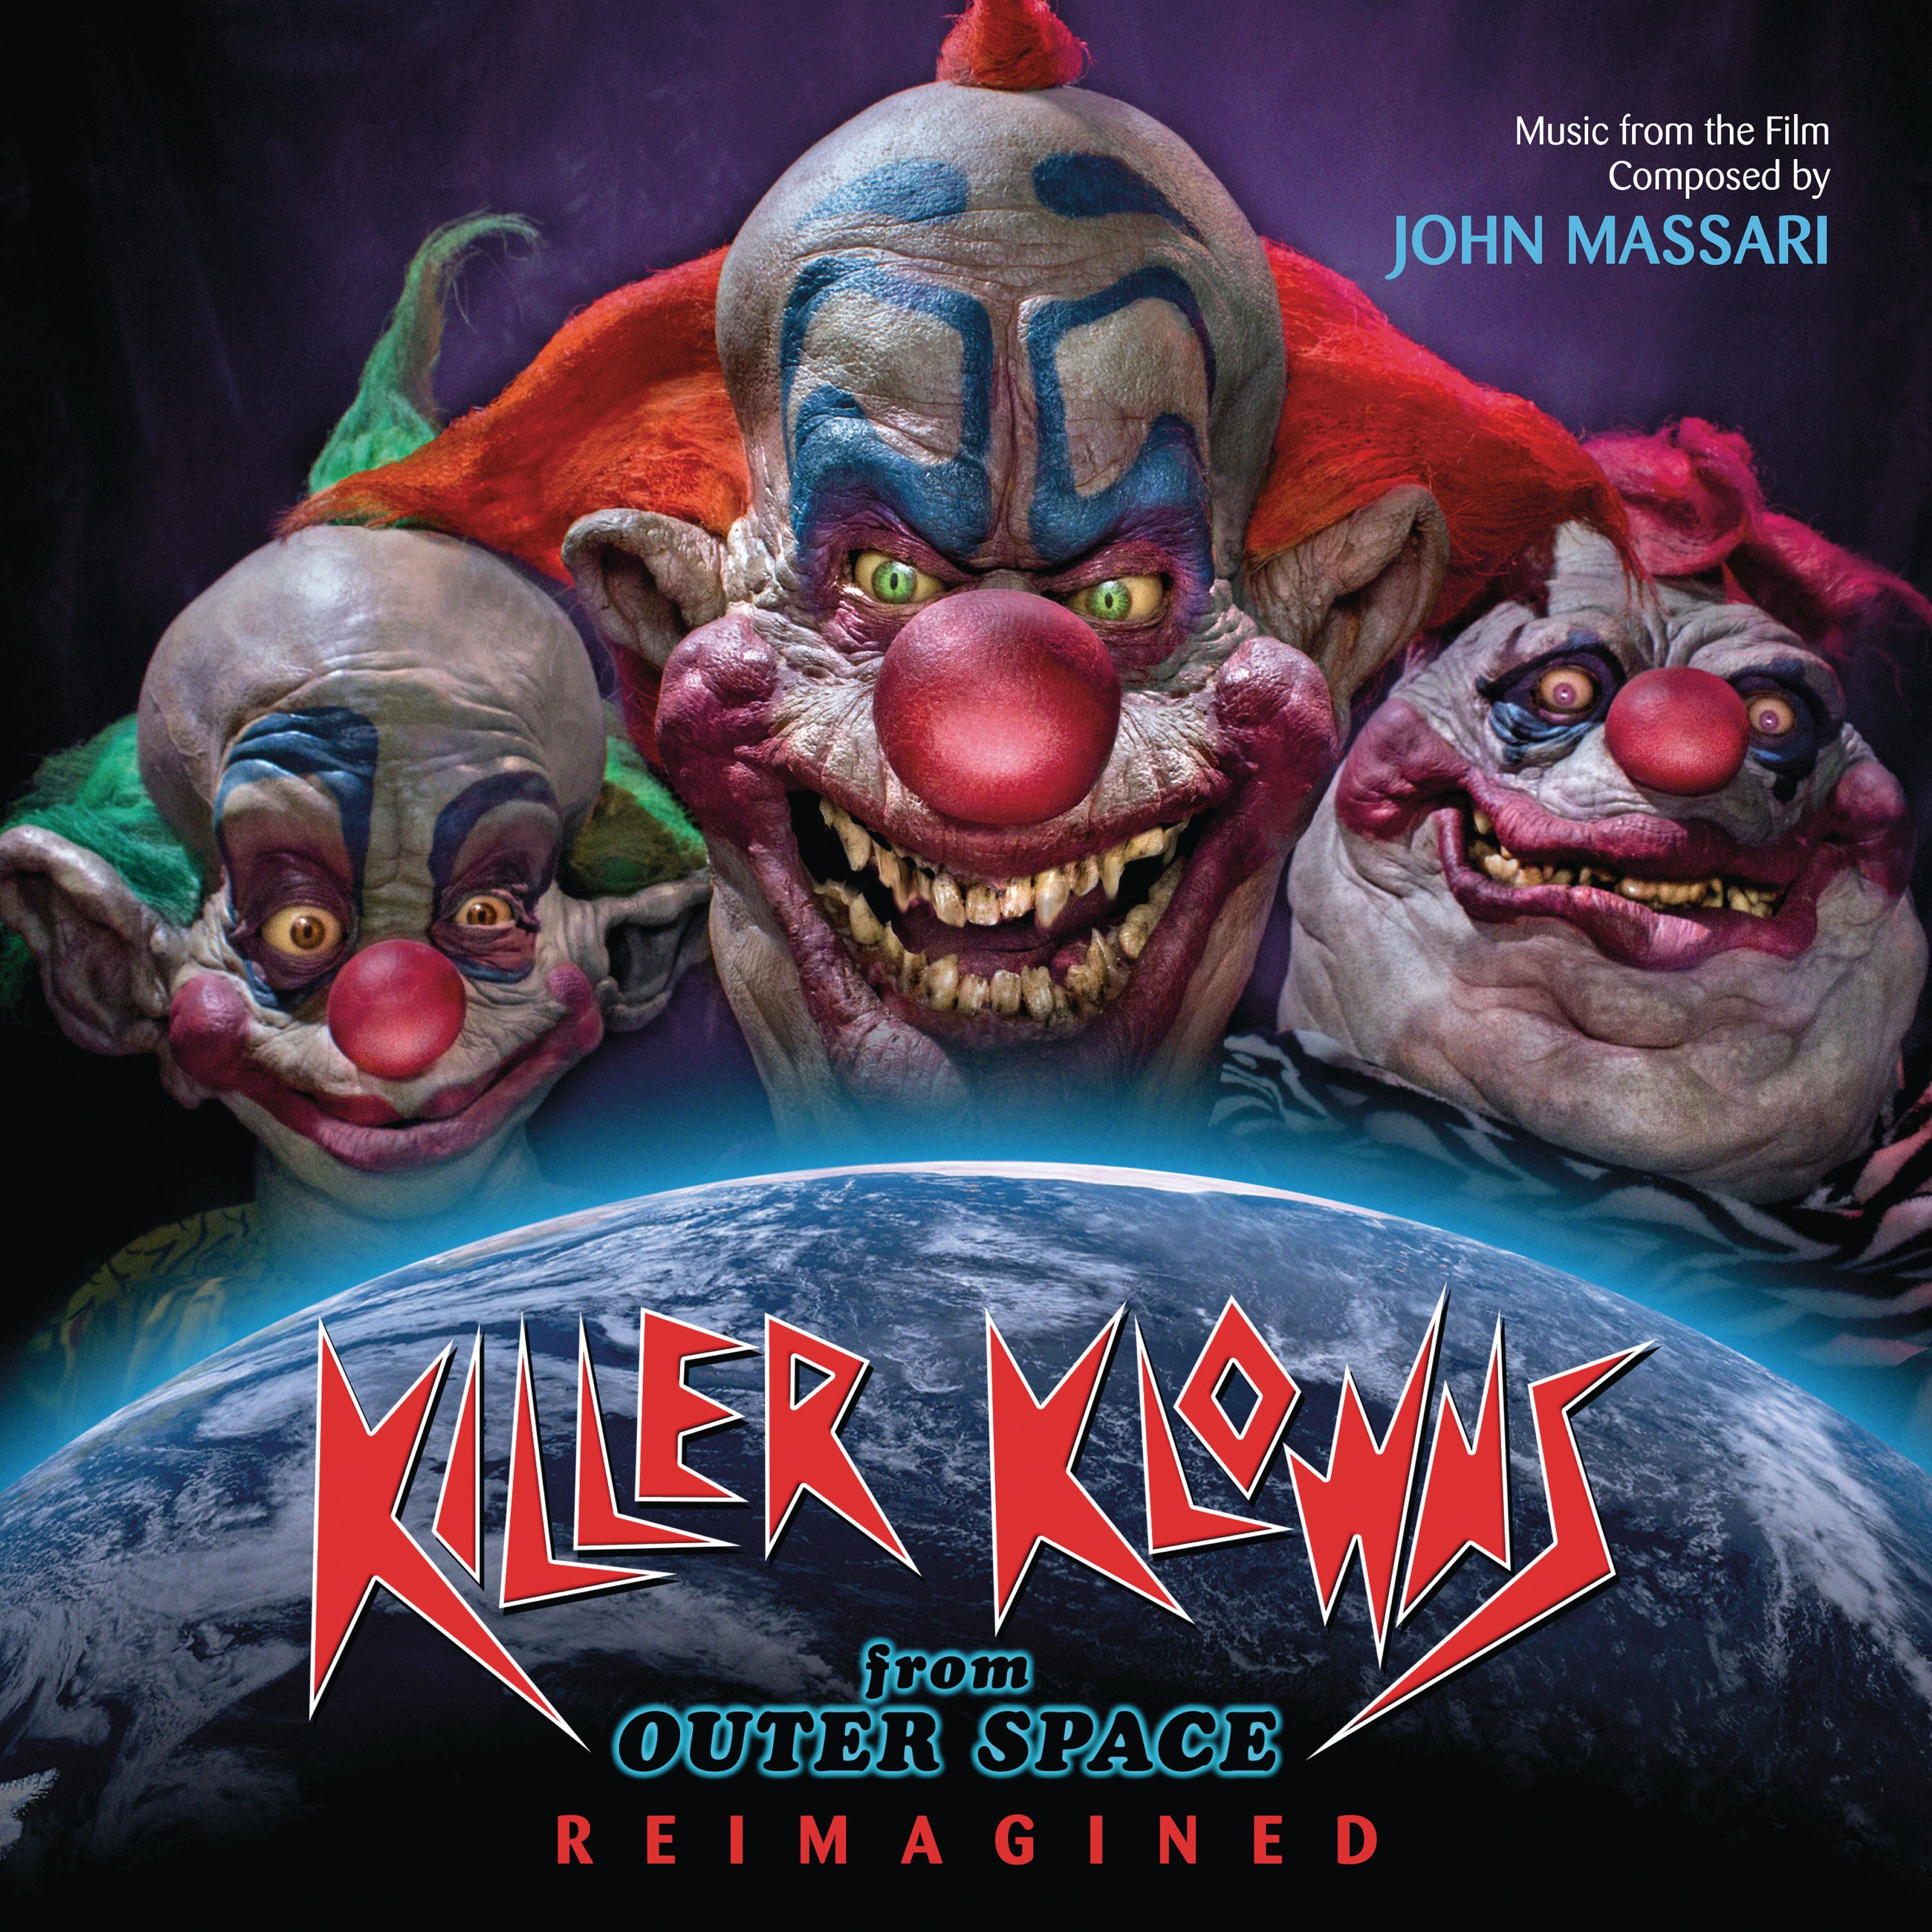 Killer klowns from outer. Клоуны-убийцы из космоса. Klowns from Outer Space.